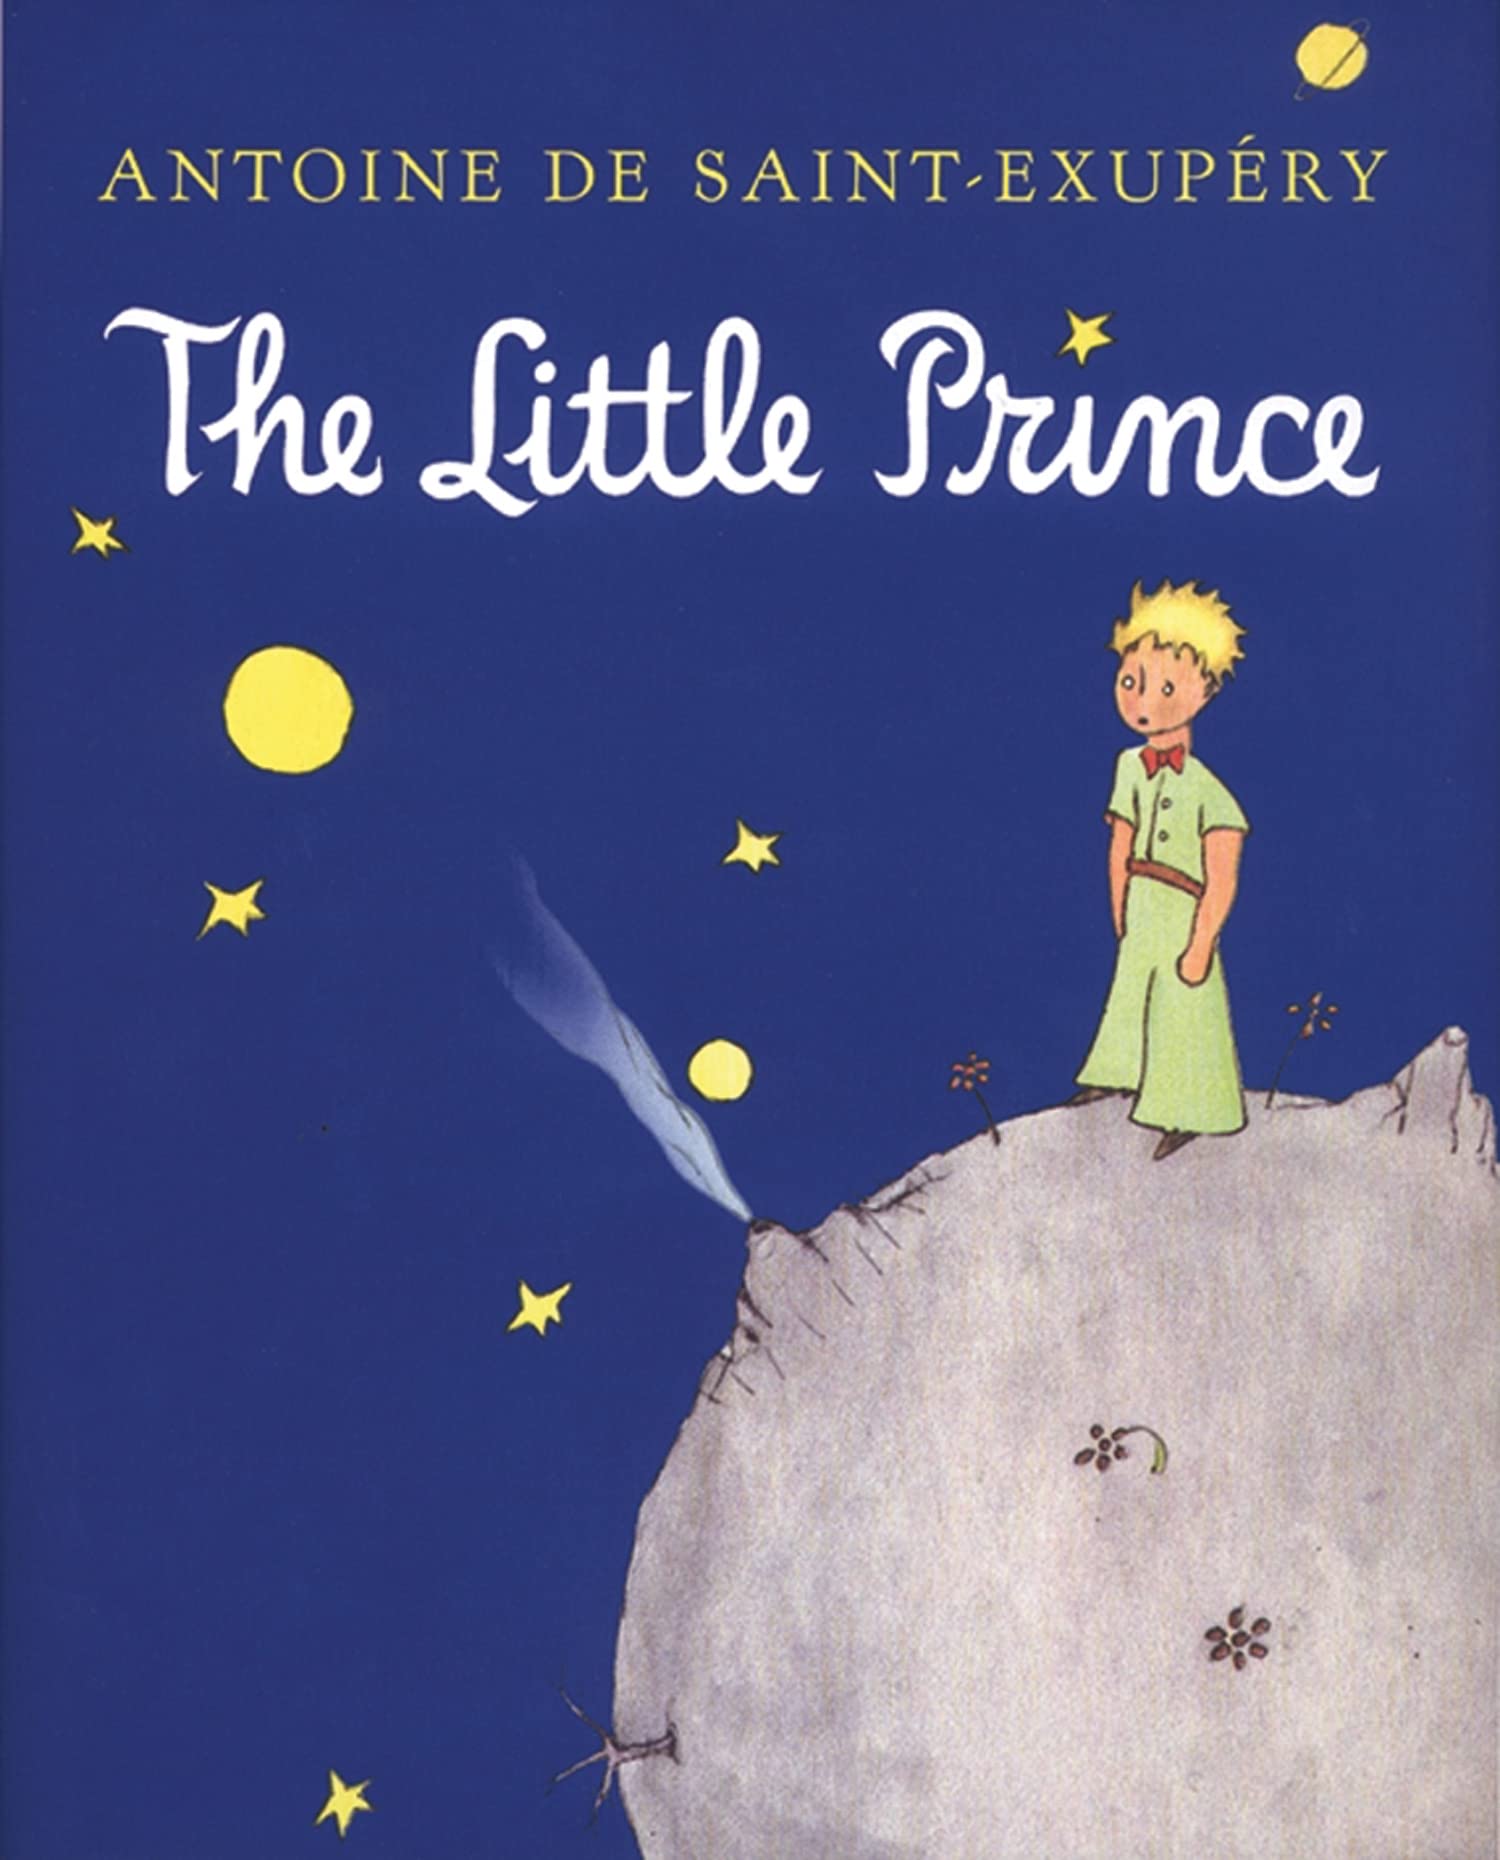 Cover of "The Little Prince", a book that English language learners can enjoy reading.